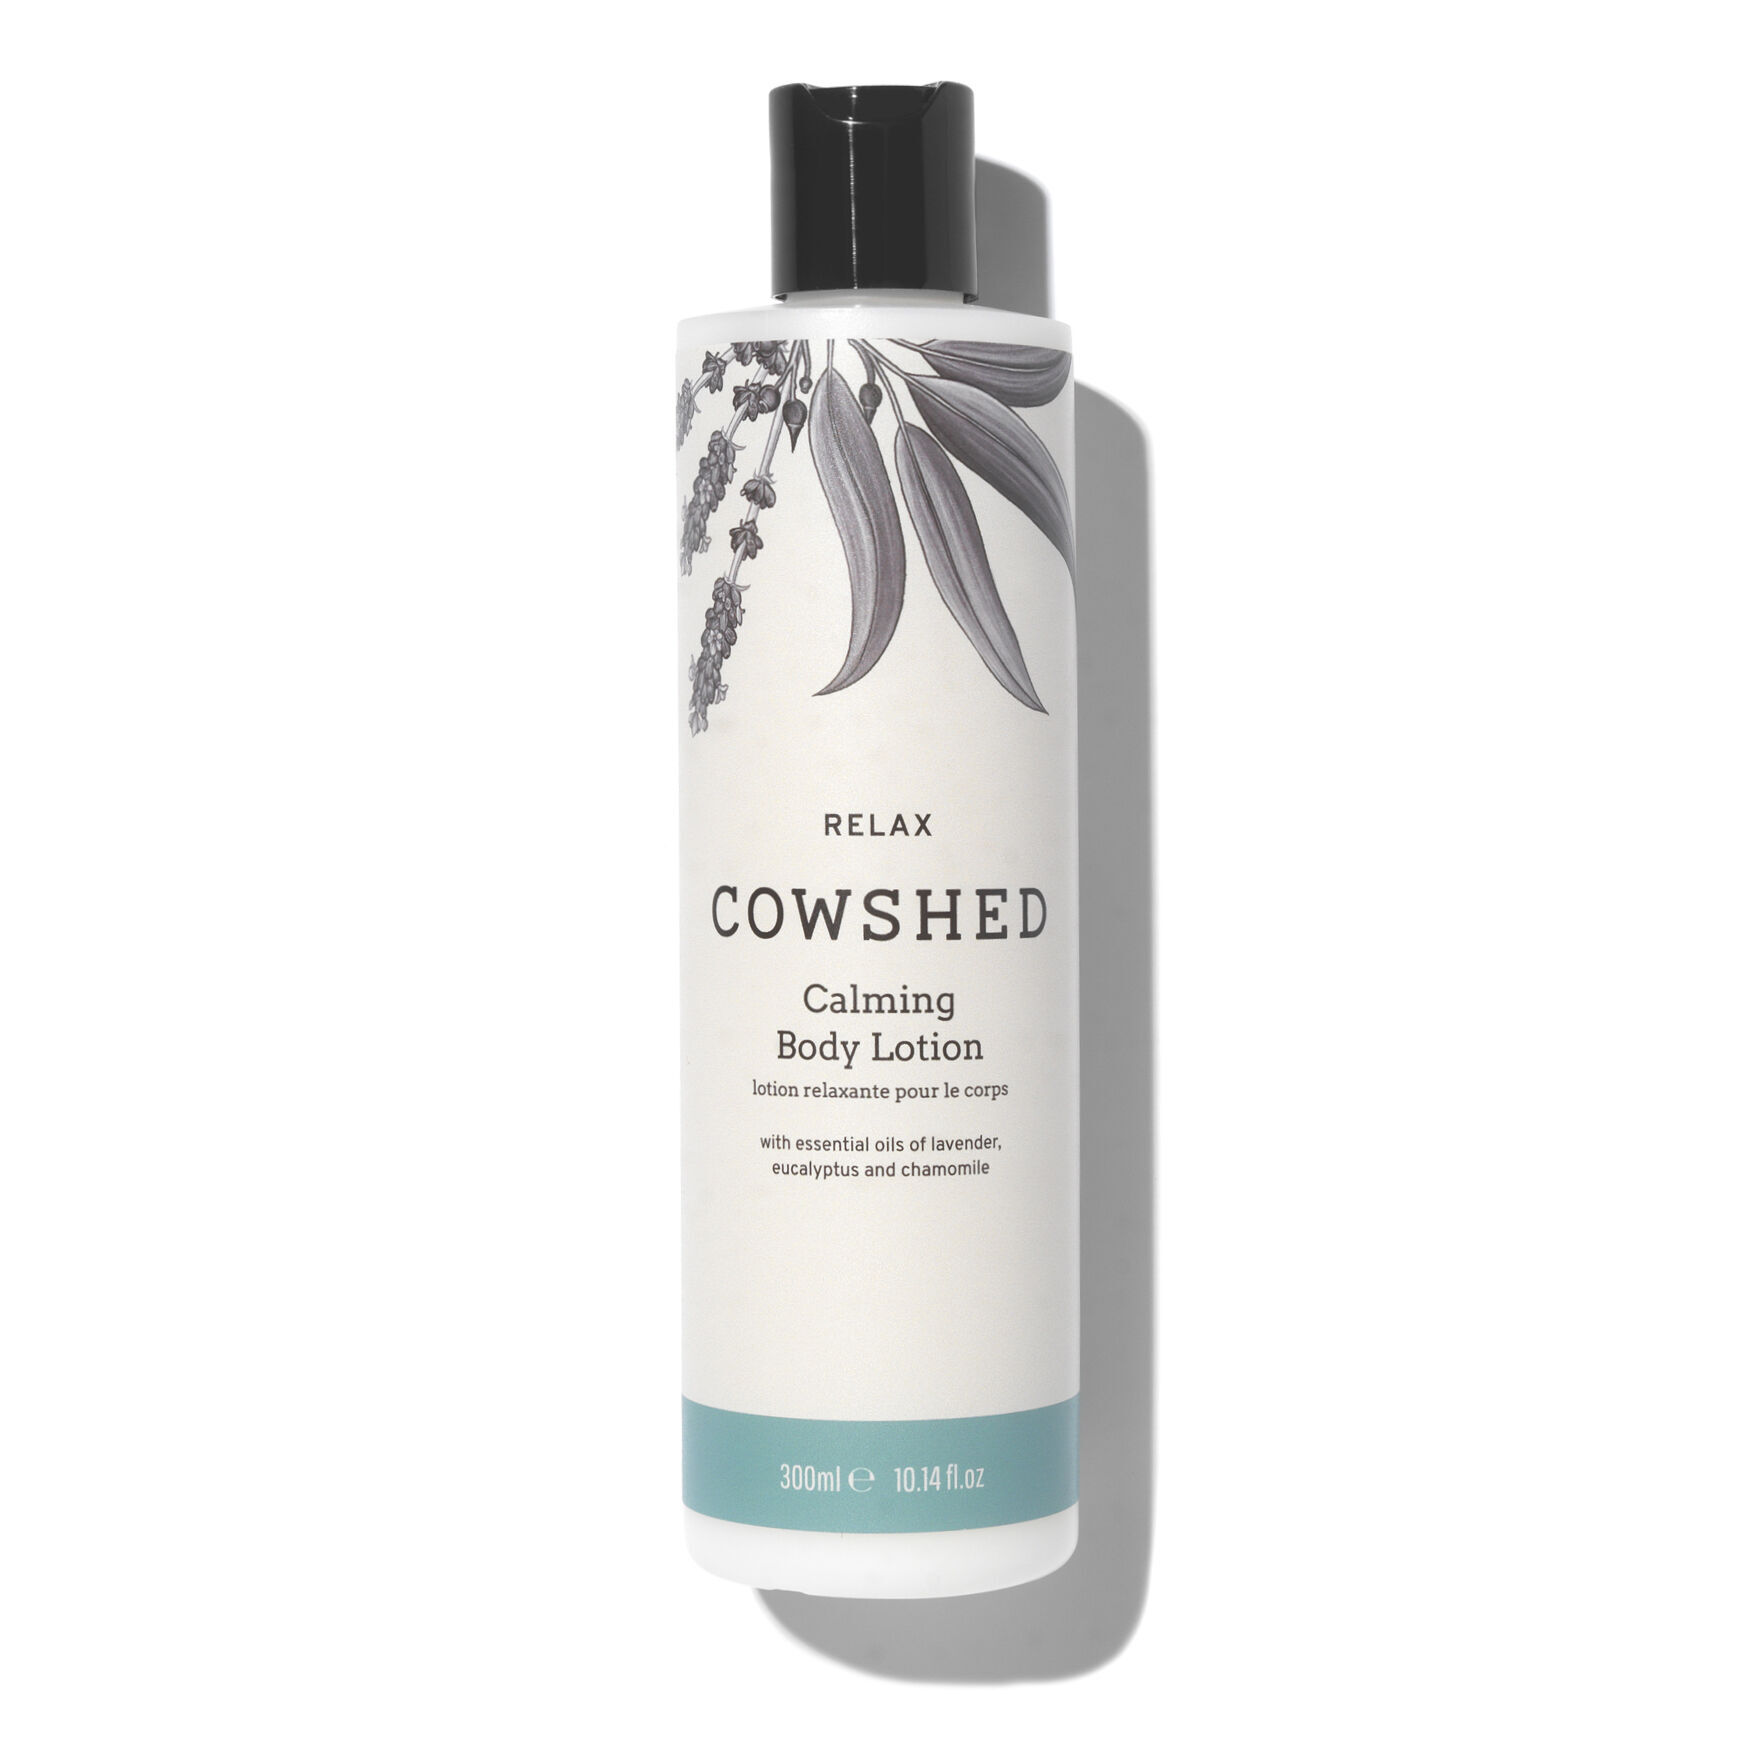 Cowshed - Relax Calming Body Lotion by Cowshed